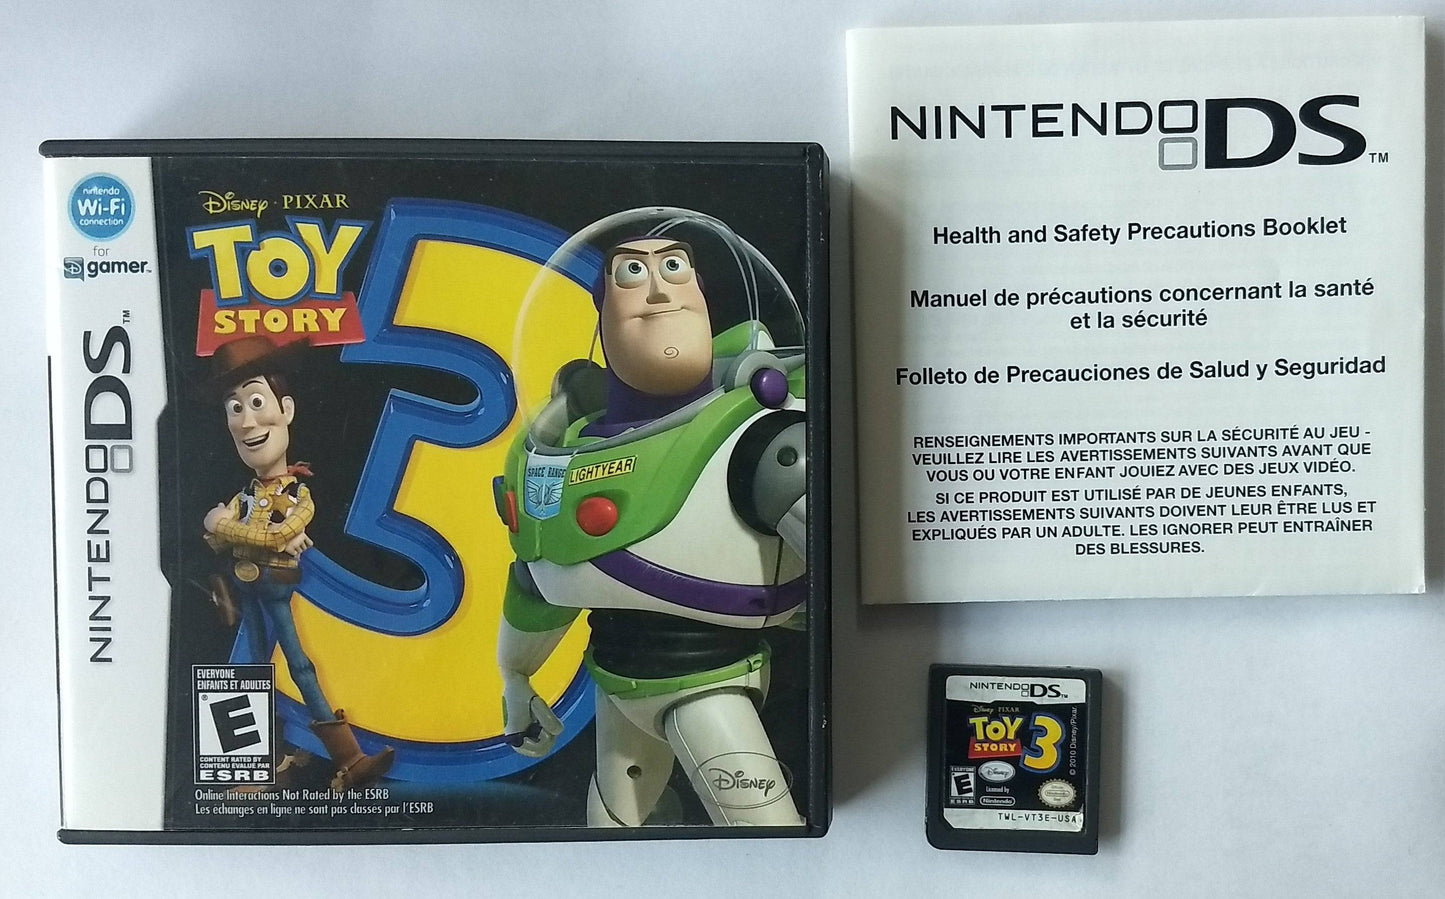 TOY STORY 3 THE VIDEO GAME NINTENDO DS - jeux video game-x